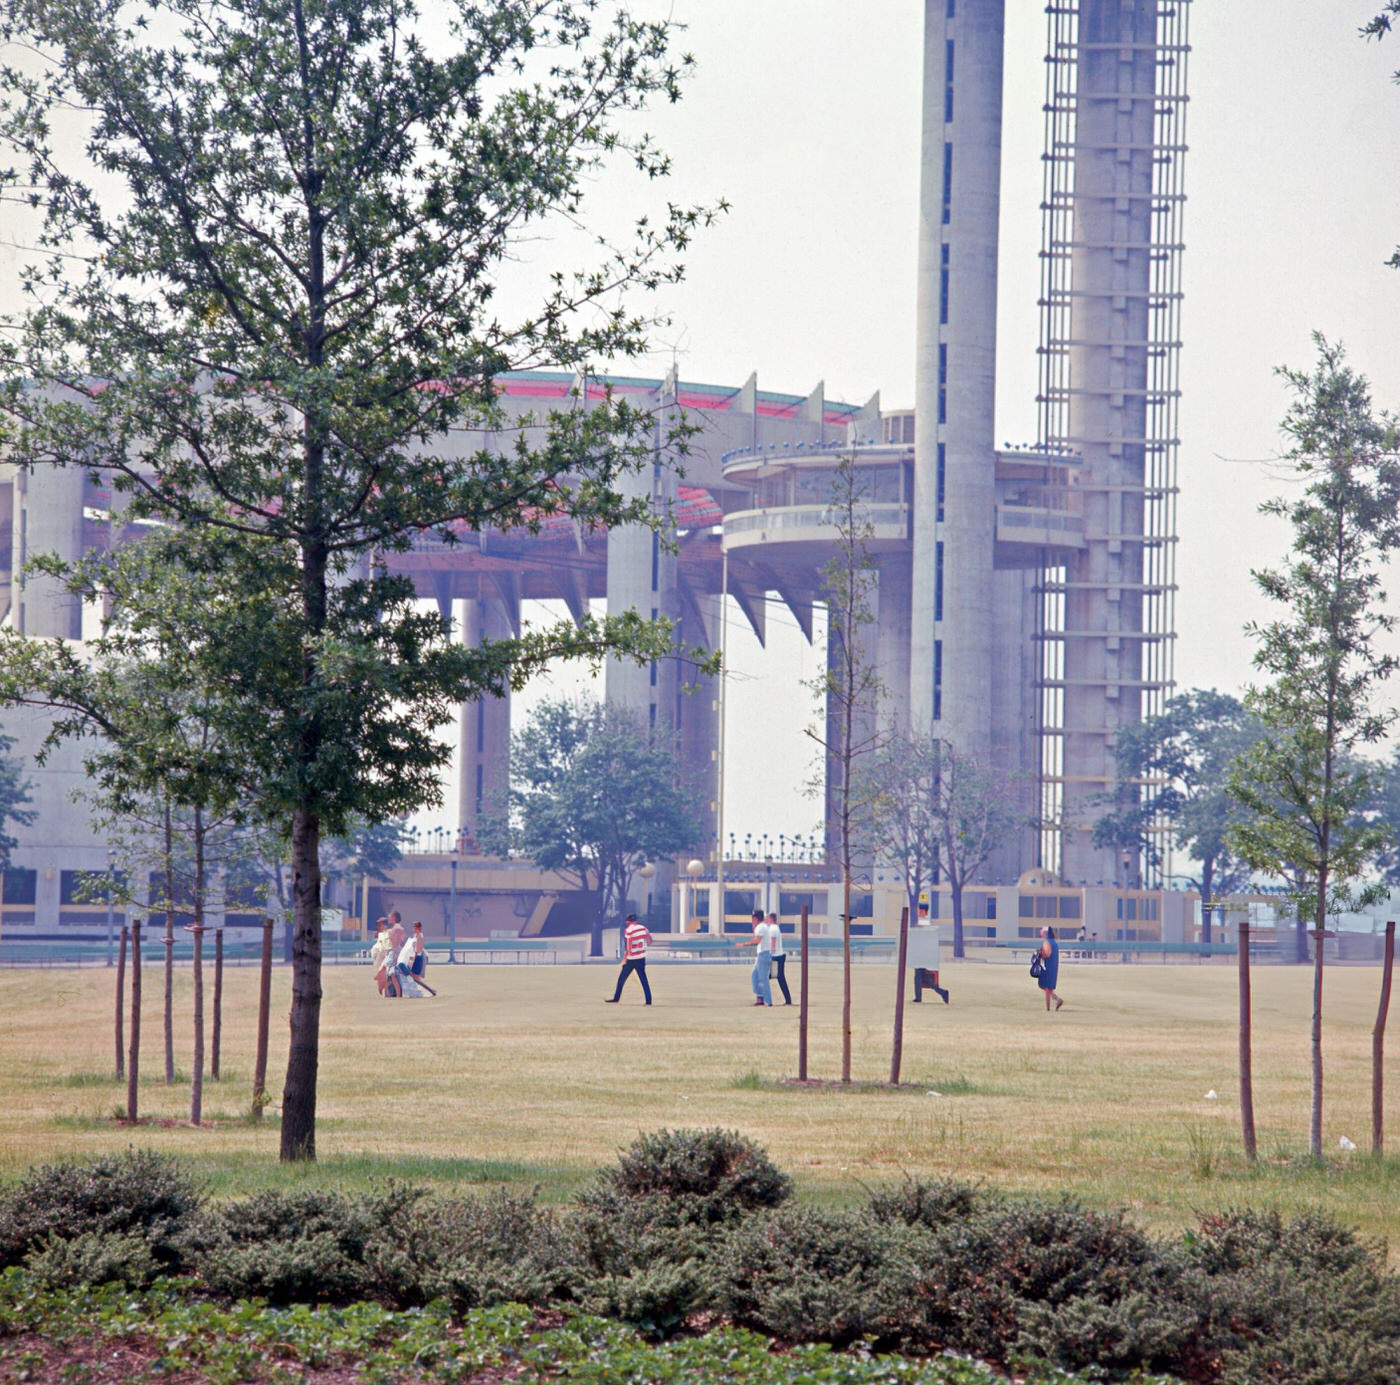 People On A Lawn Next To The World'S Fair Pavilion And Observation Towers, Flushing Meadows Corona Park, 1967.